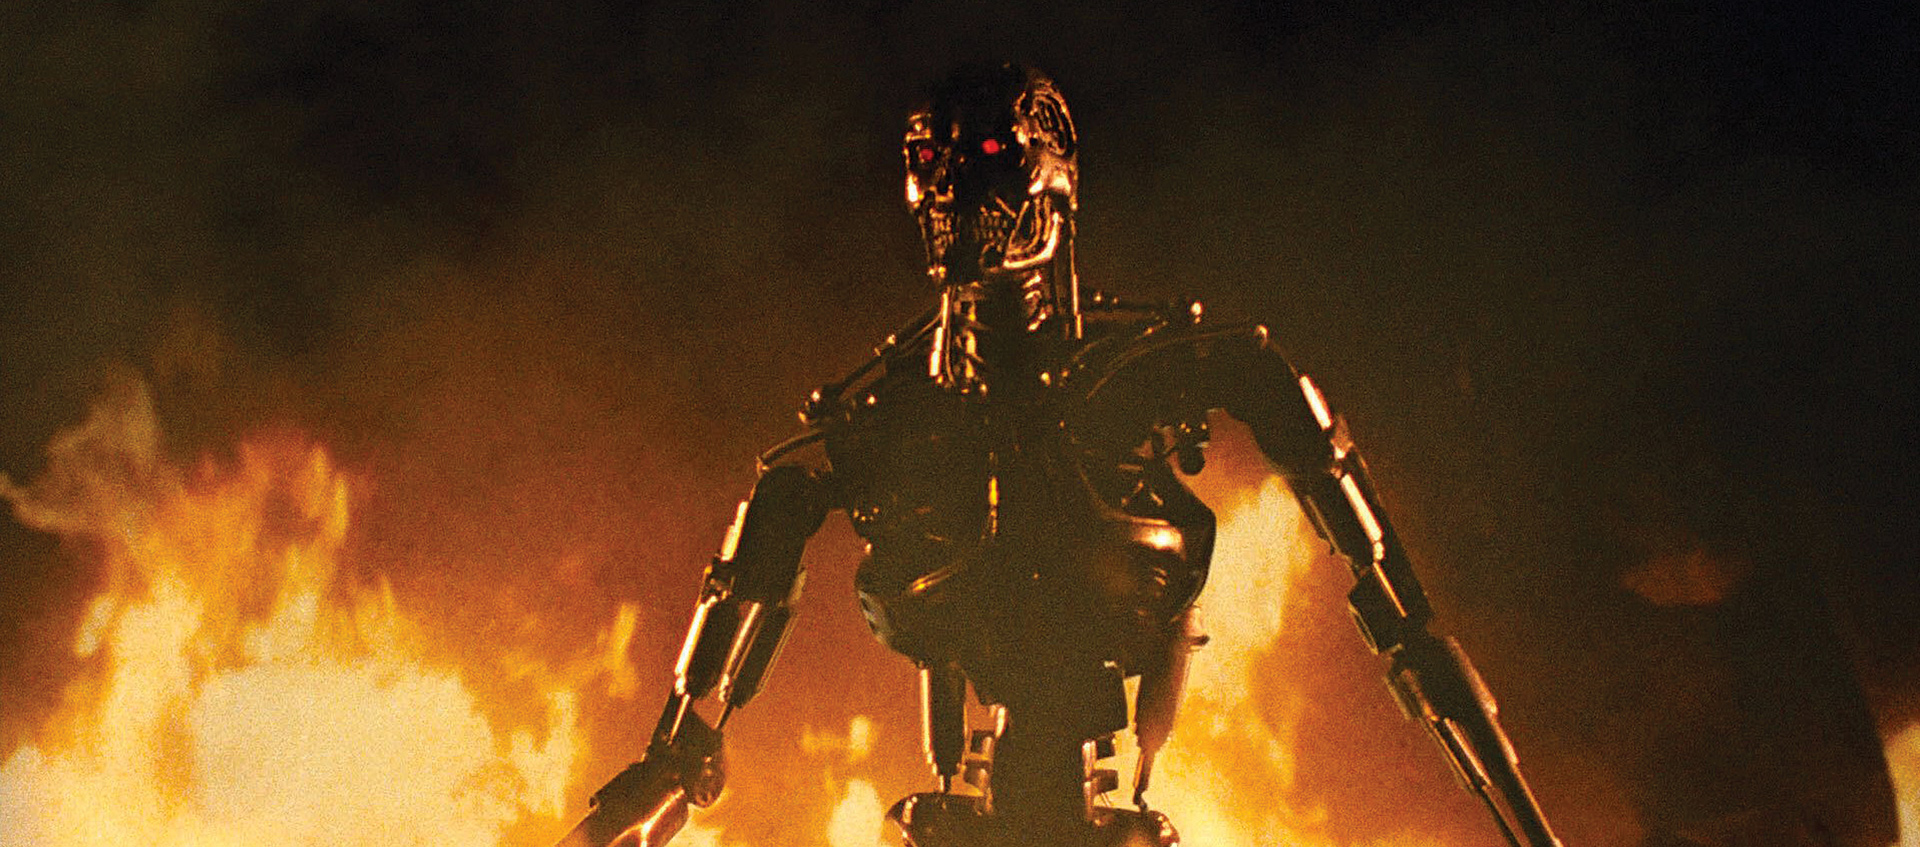 The Terminator | Wexner Center for the Arts